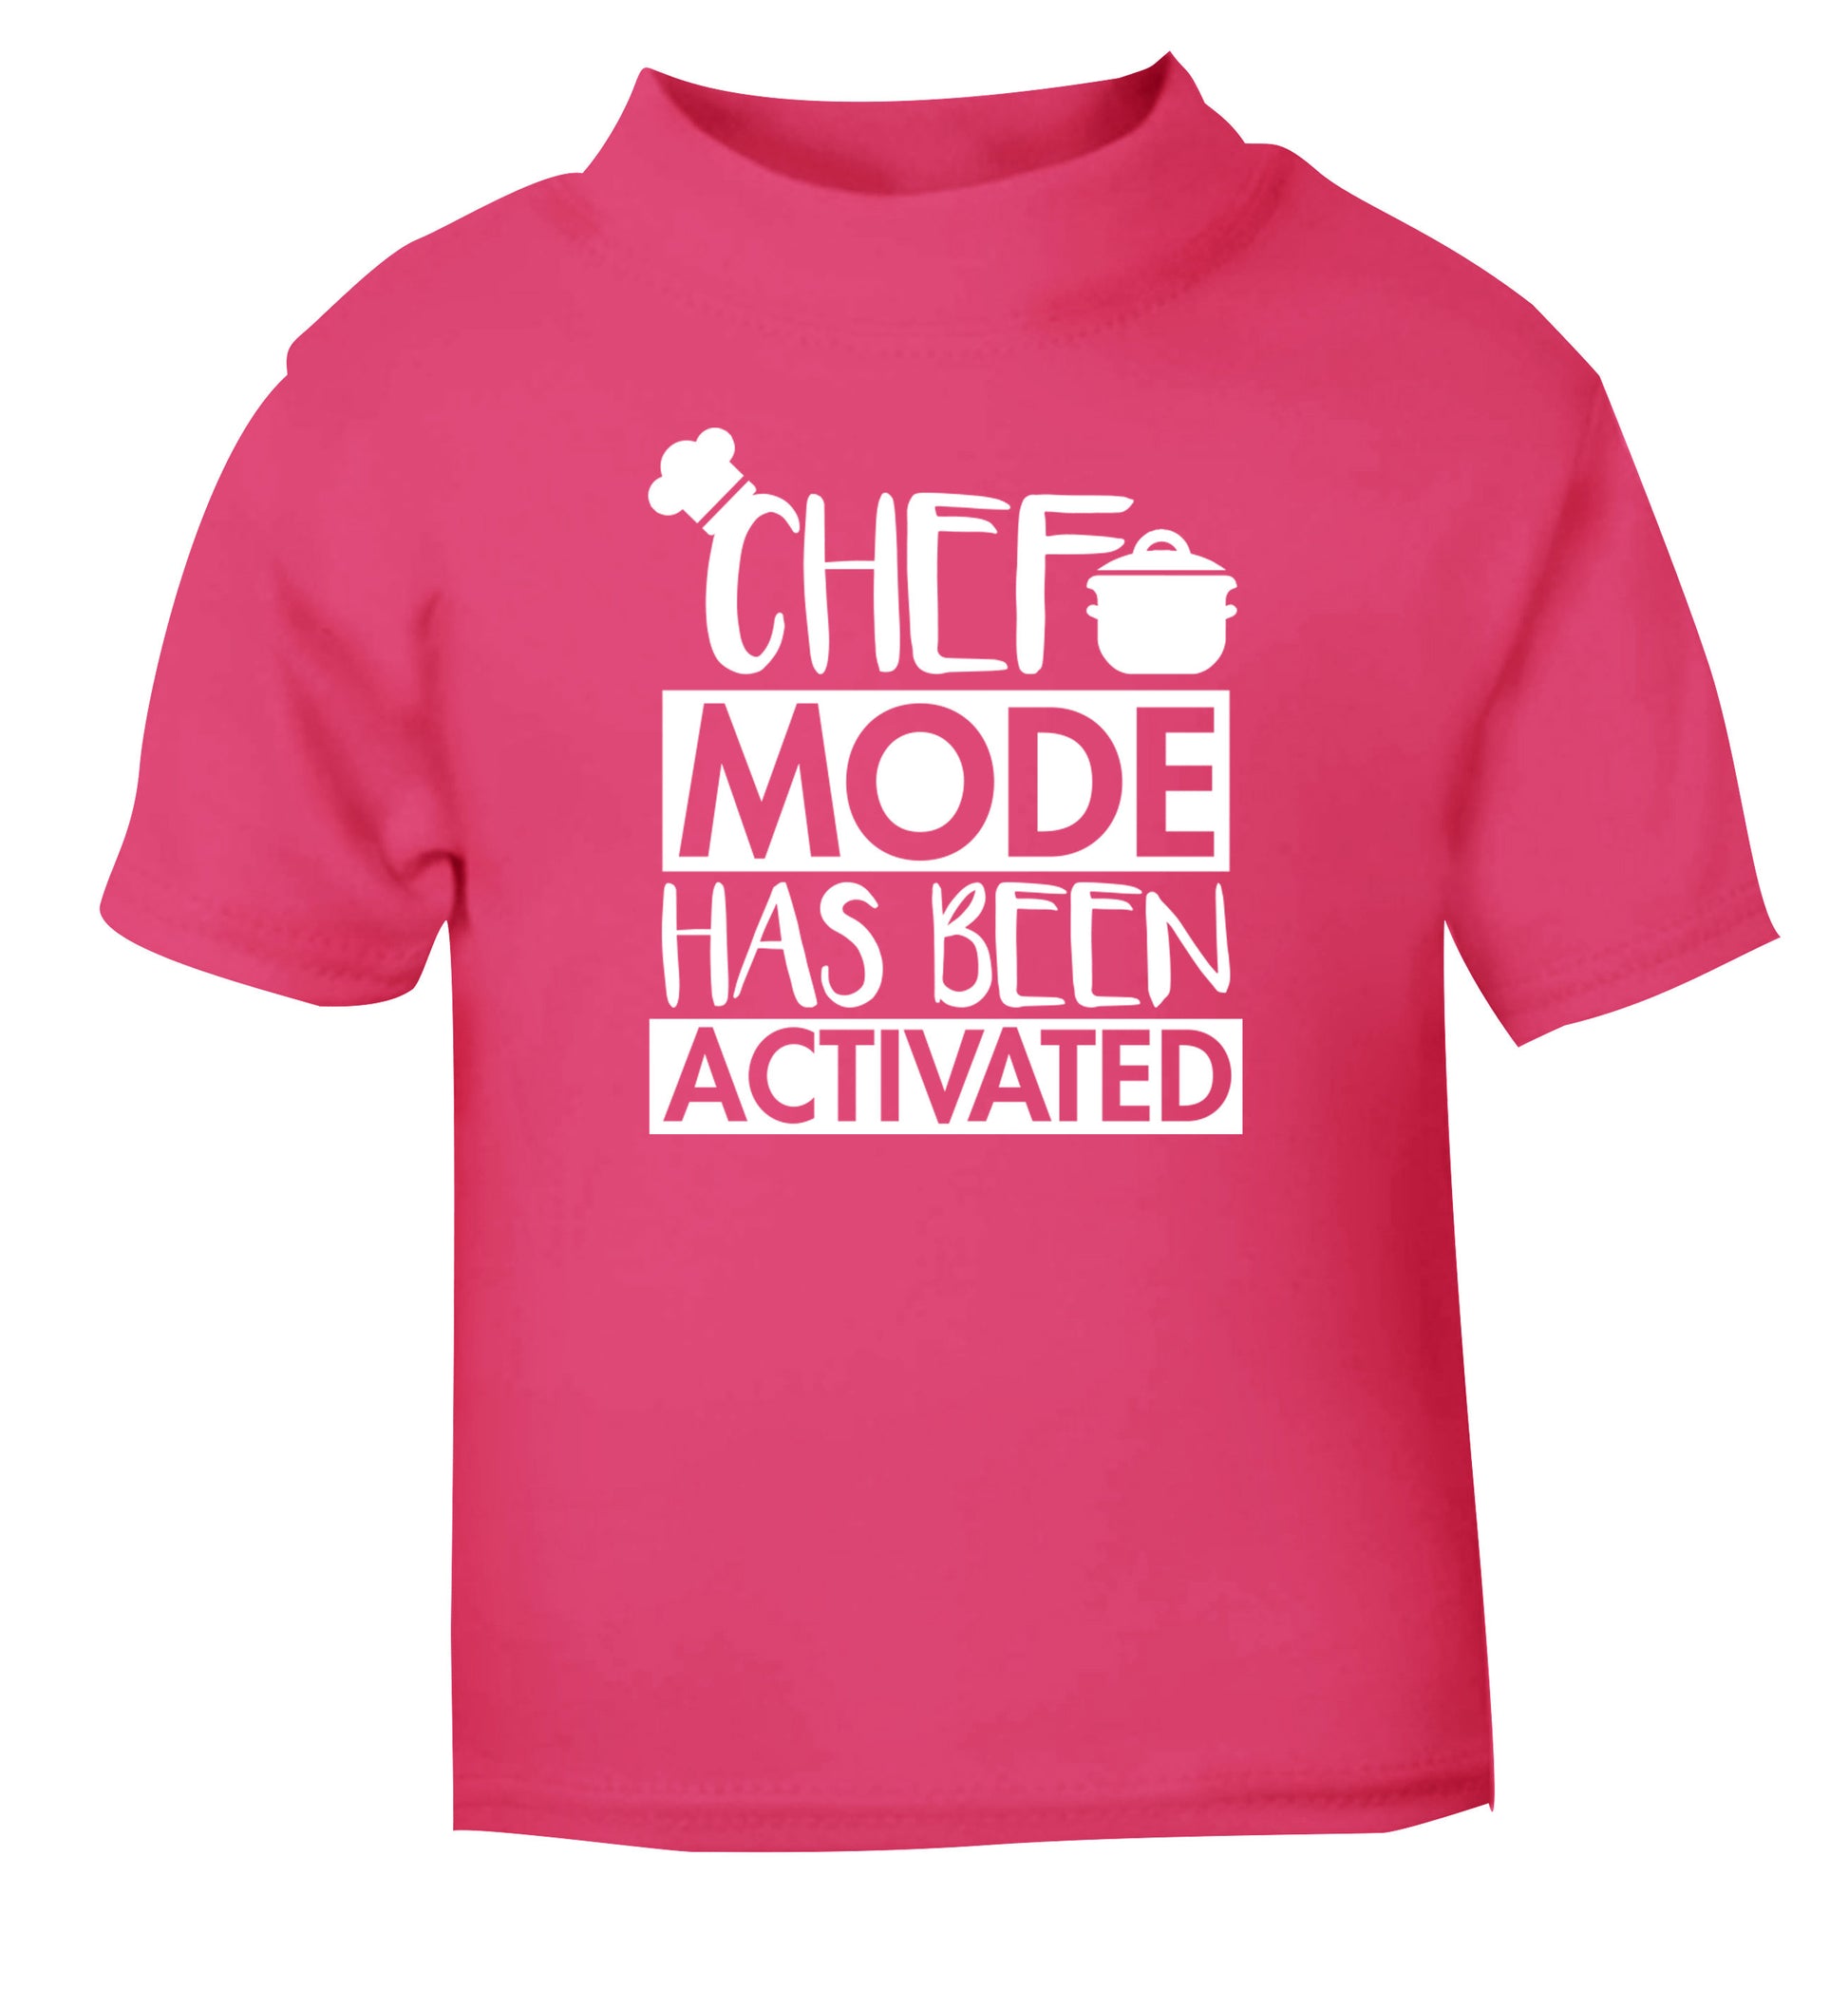 Chef mode has been activated pink Baby Toddler Tshirt 2 Years